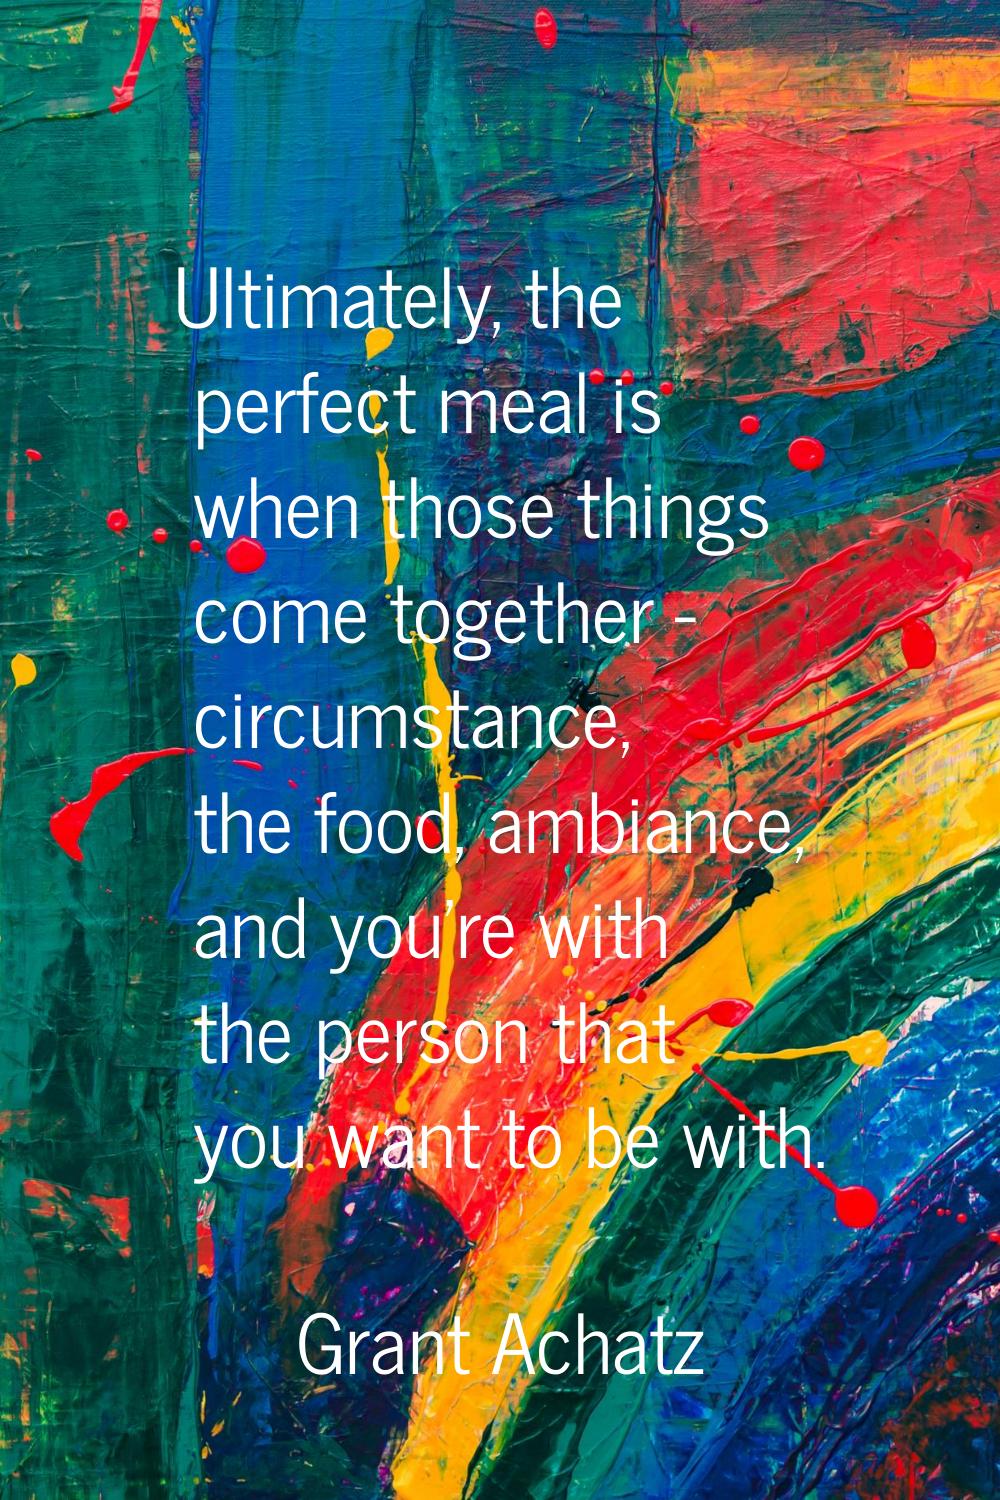 Ultimately, the perfect meal is when those things come together - circumstance, the food, ambiance,